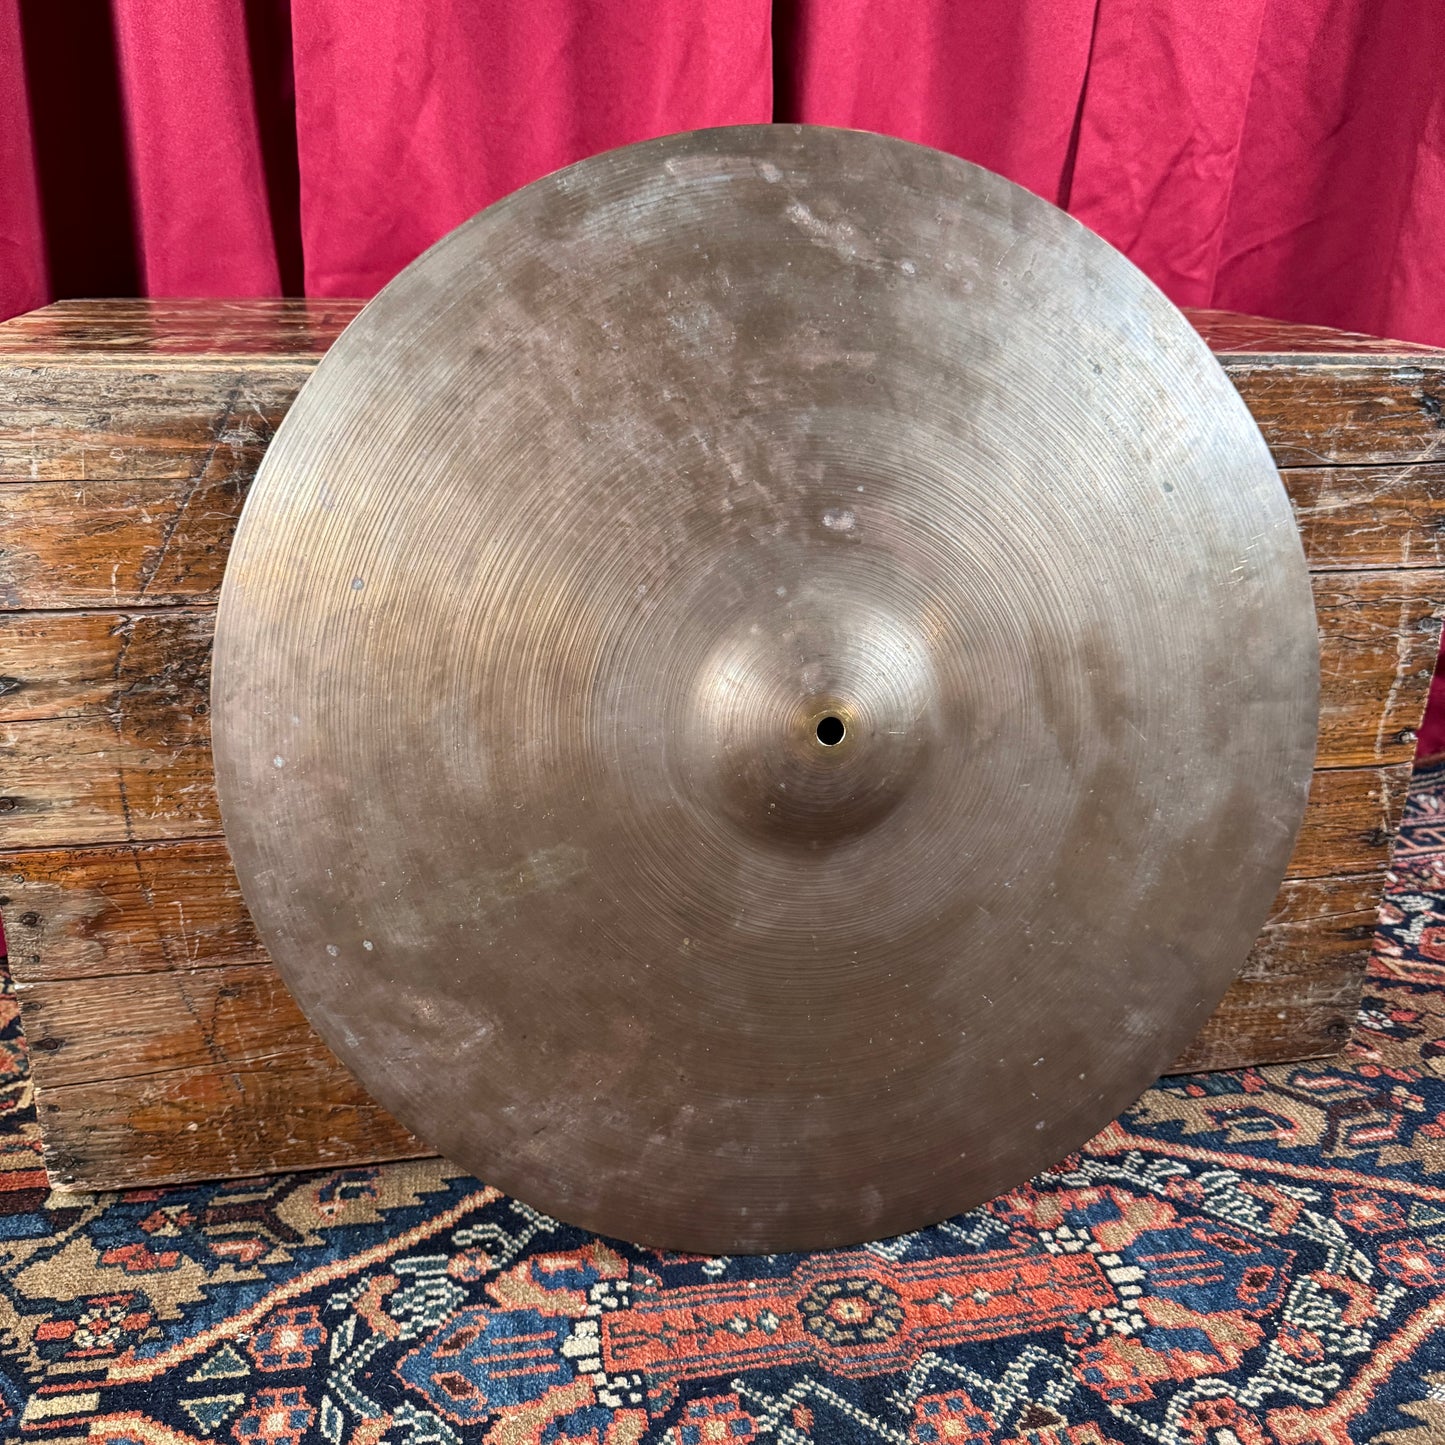 22" Made in Japan 1960s K Ride Cymbal 2252g MIJ *Video Demo*